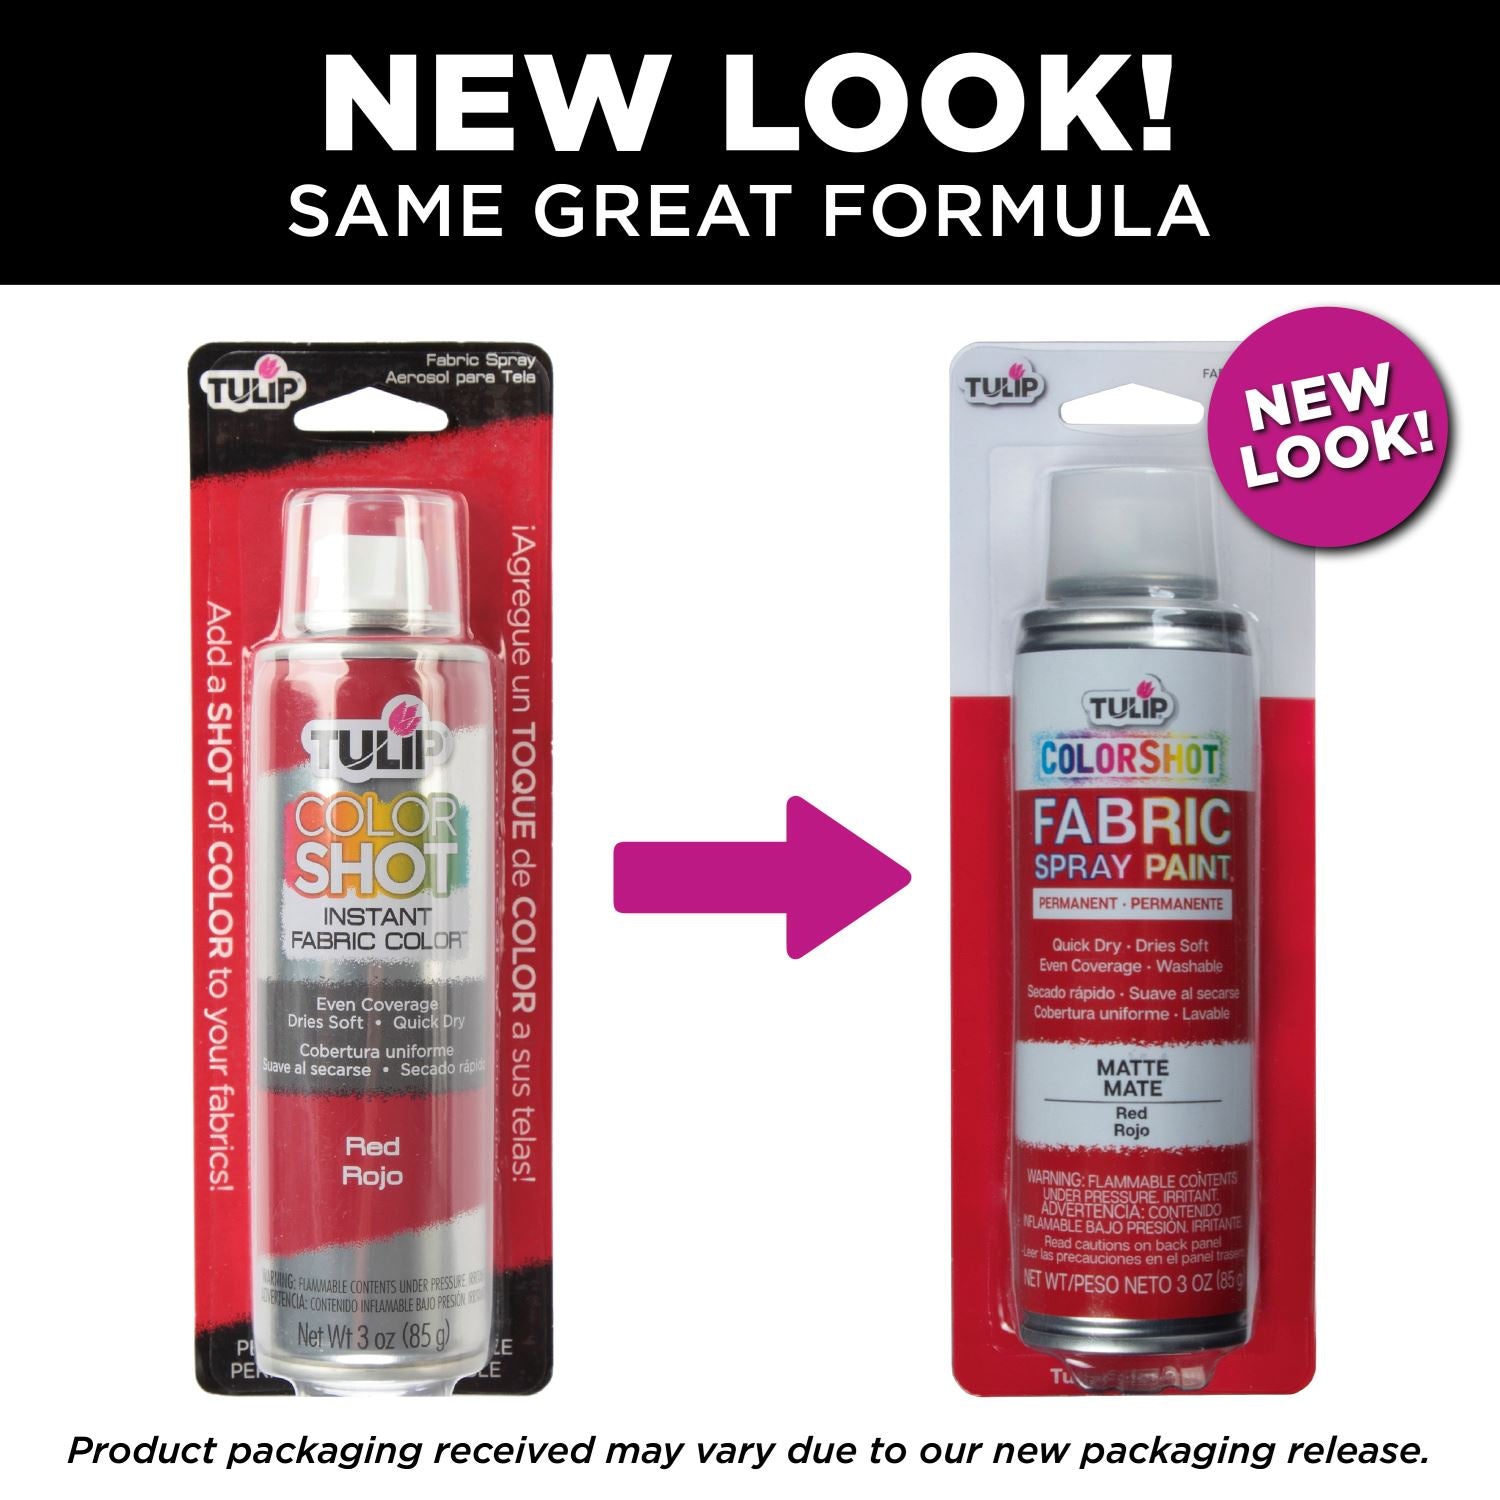 new look! same great formula. RED